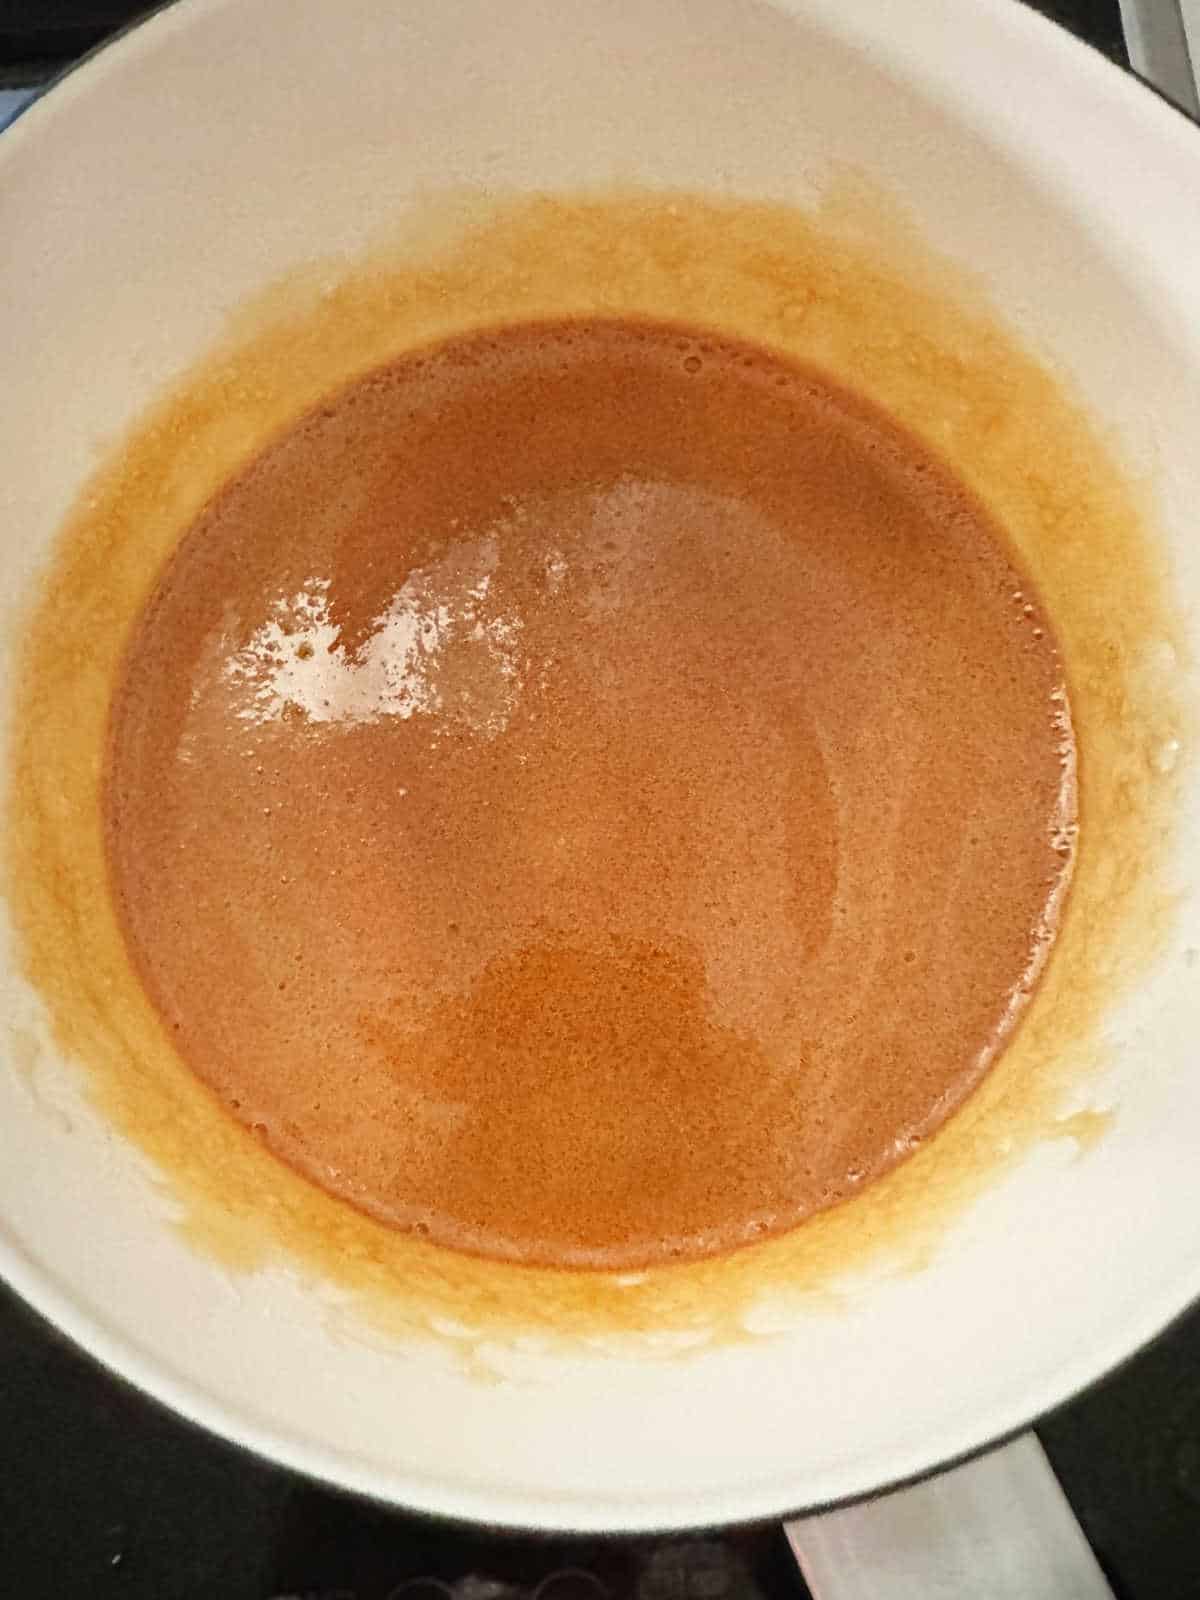 Amber colored caramel in a white saucepan. Top view.